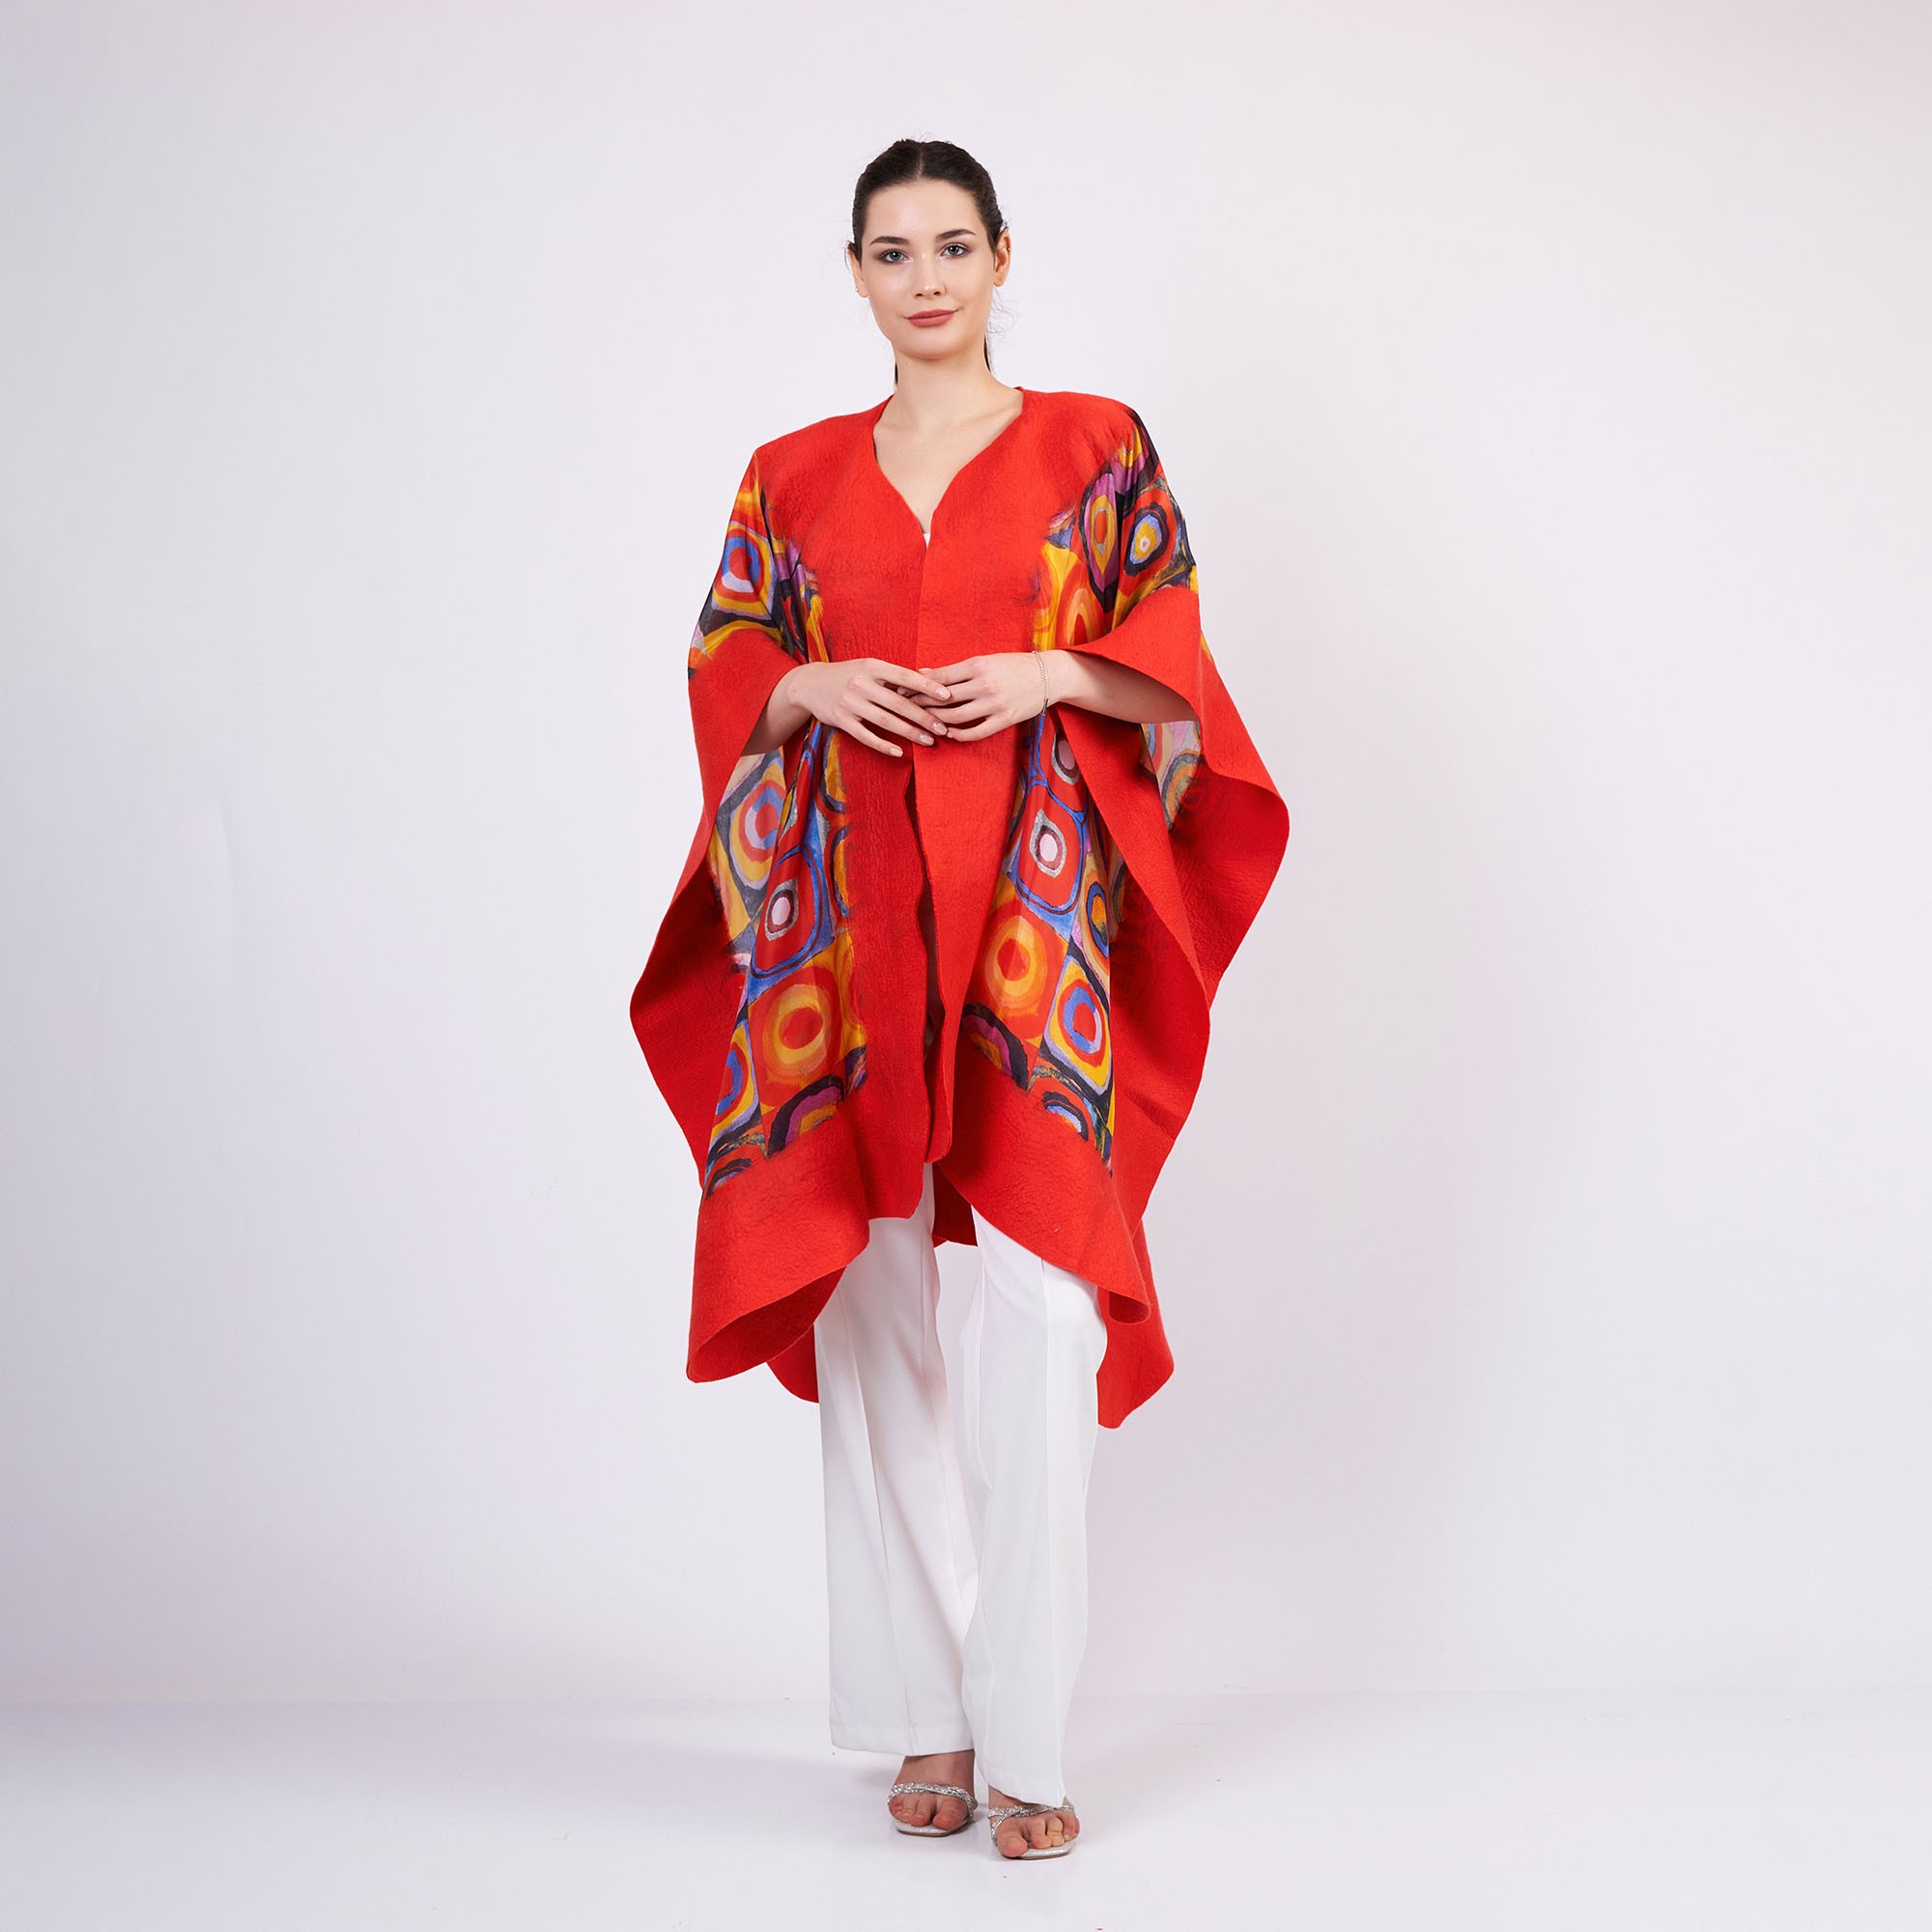 Silk Felted Women Poncho |  Red Kandinsky Squares with Circless | Plus Size Wool Poncho